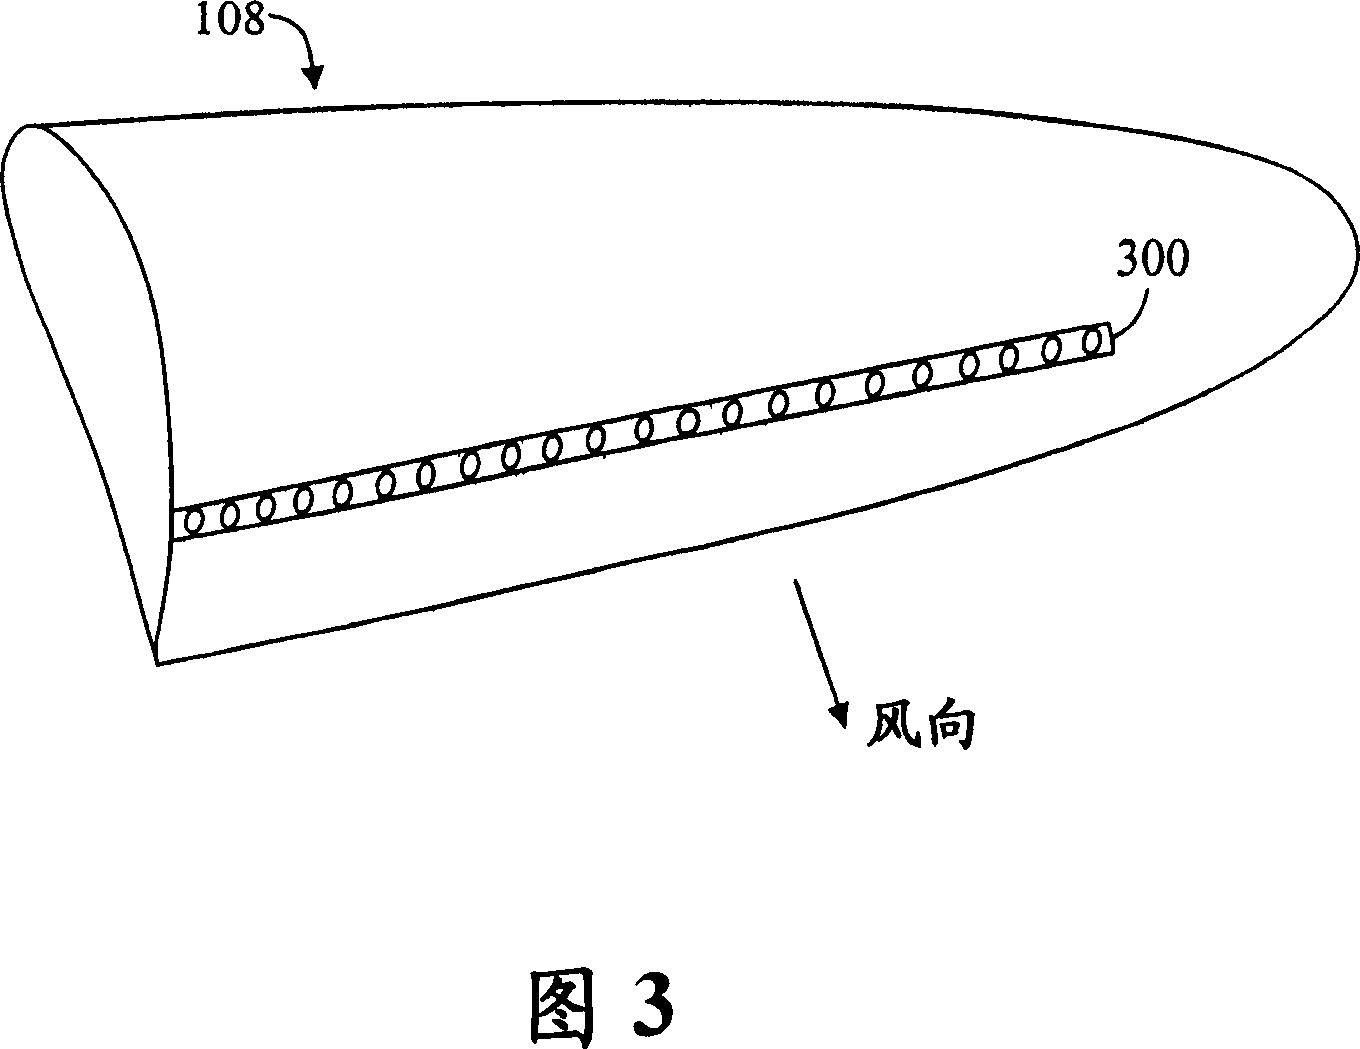 Active flow control for wind turbine blades